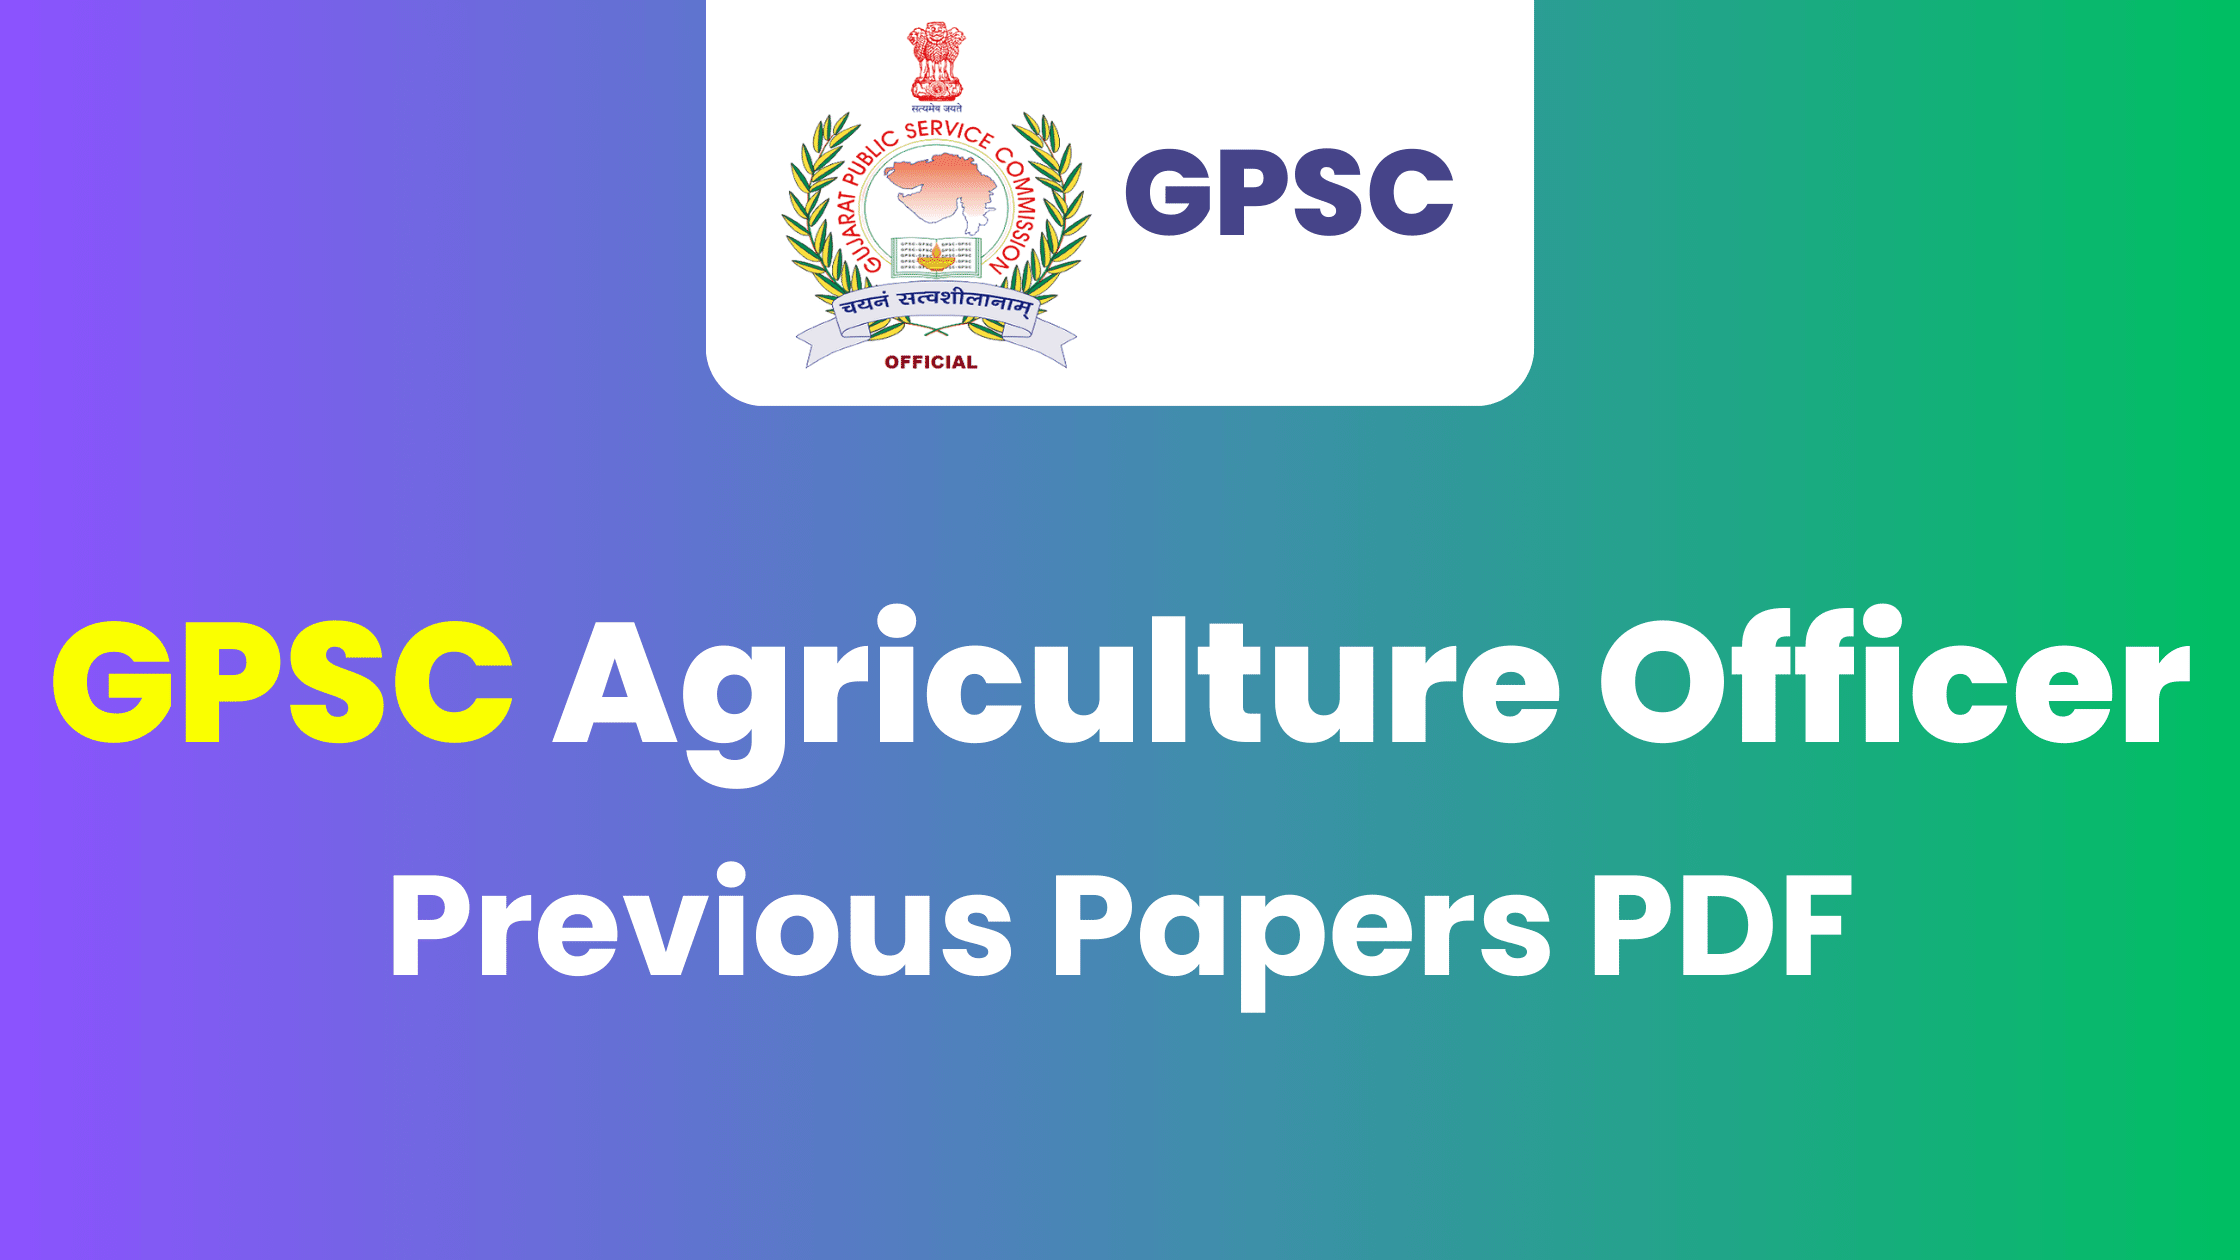 GPSC Agriculture Officer